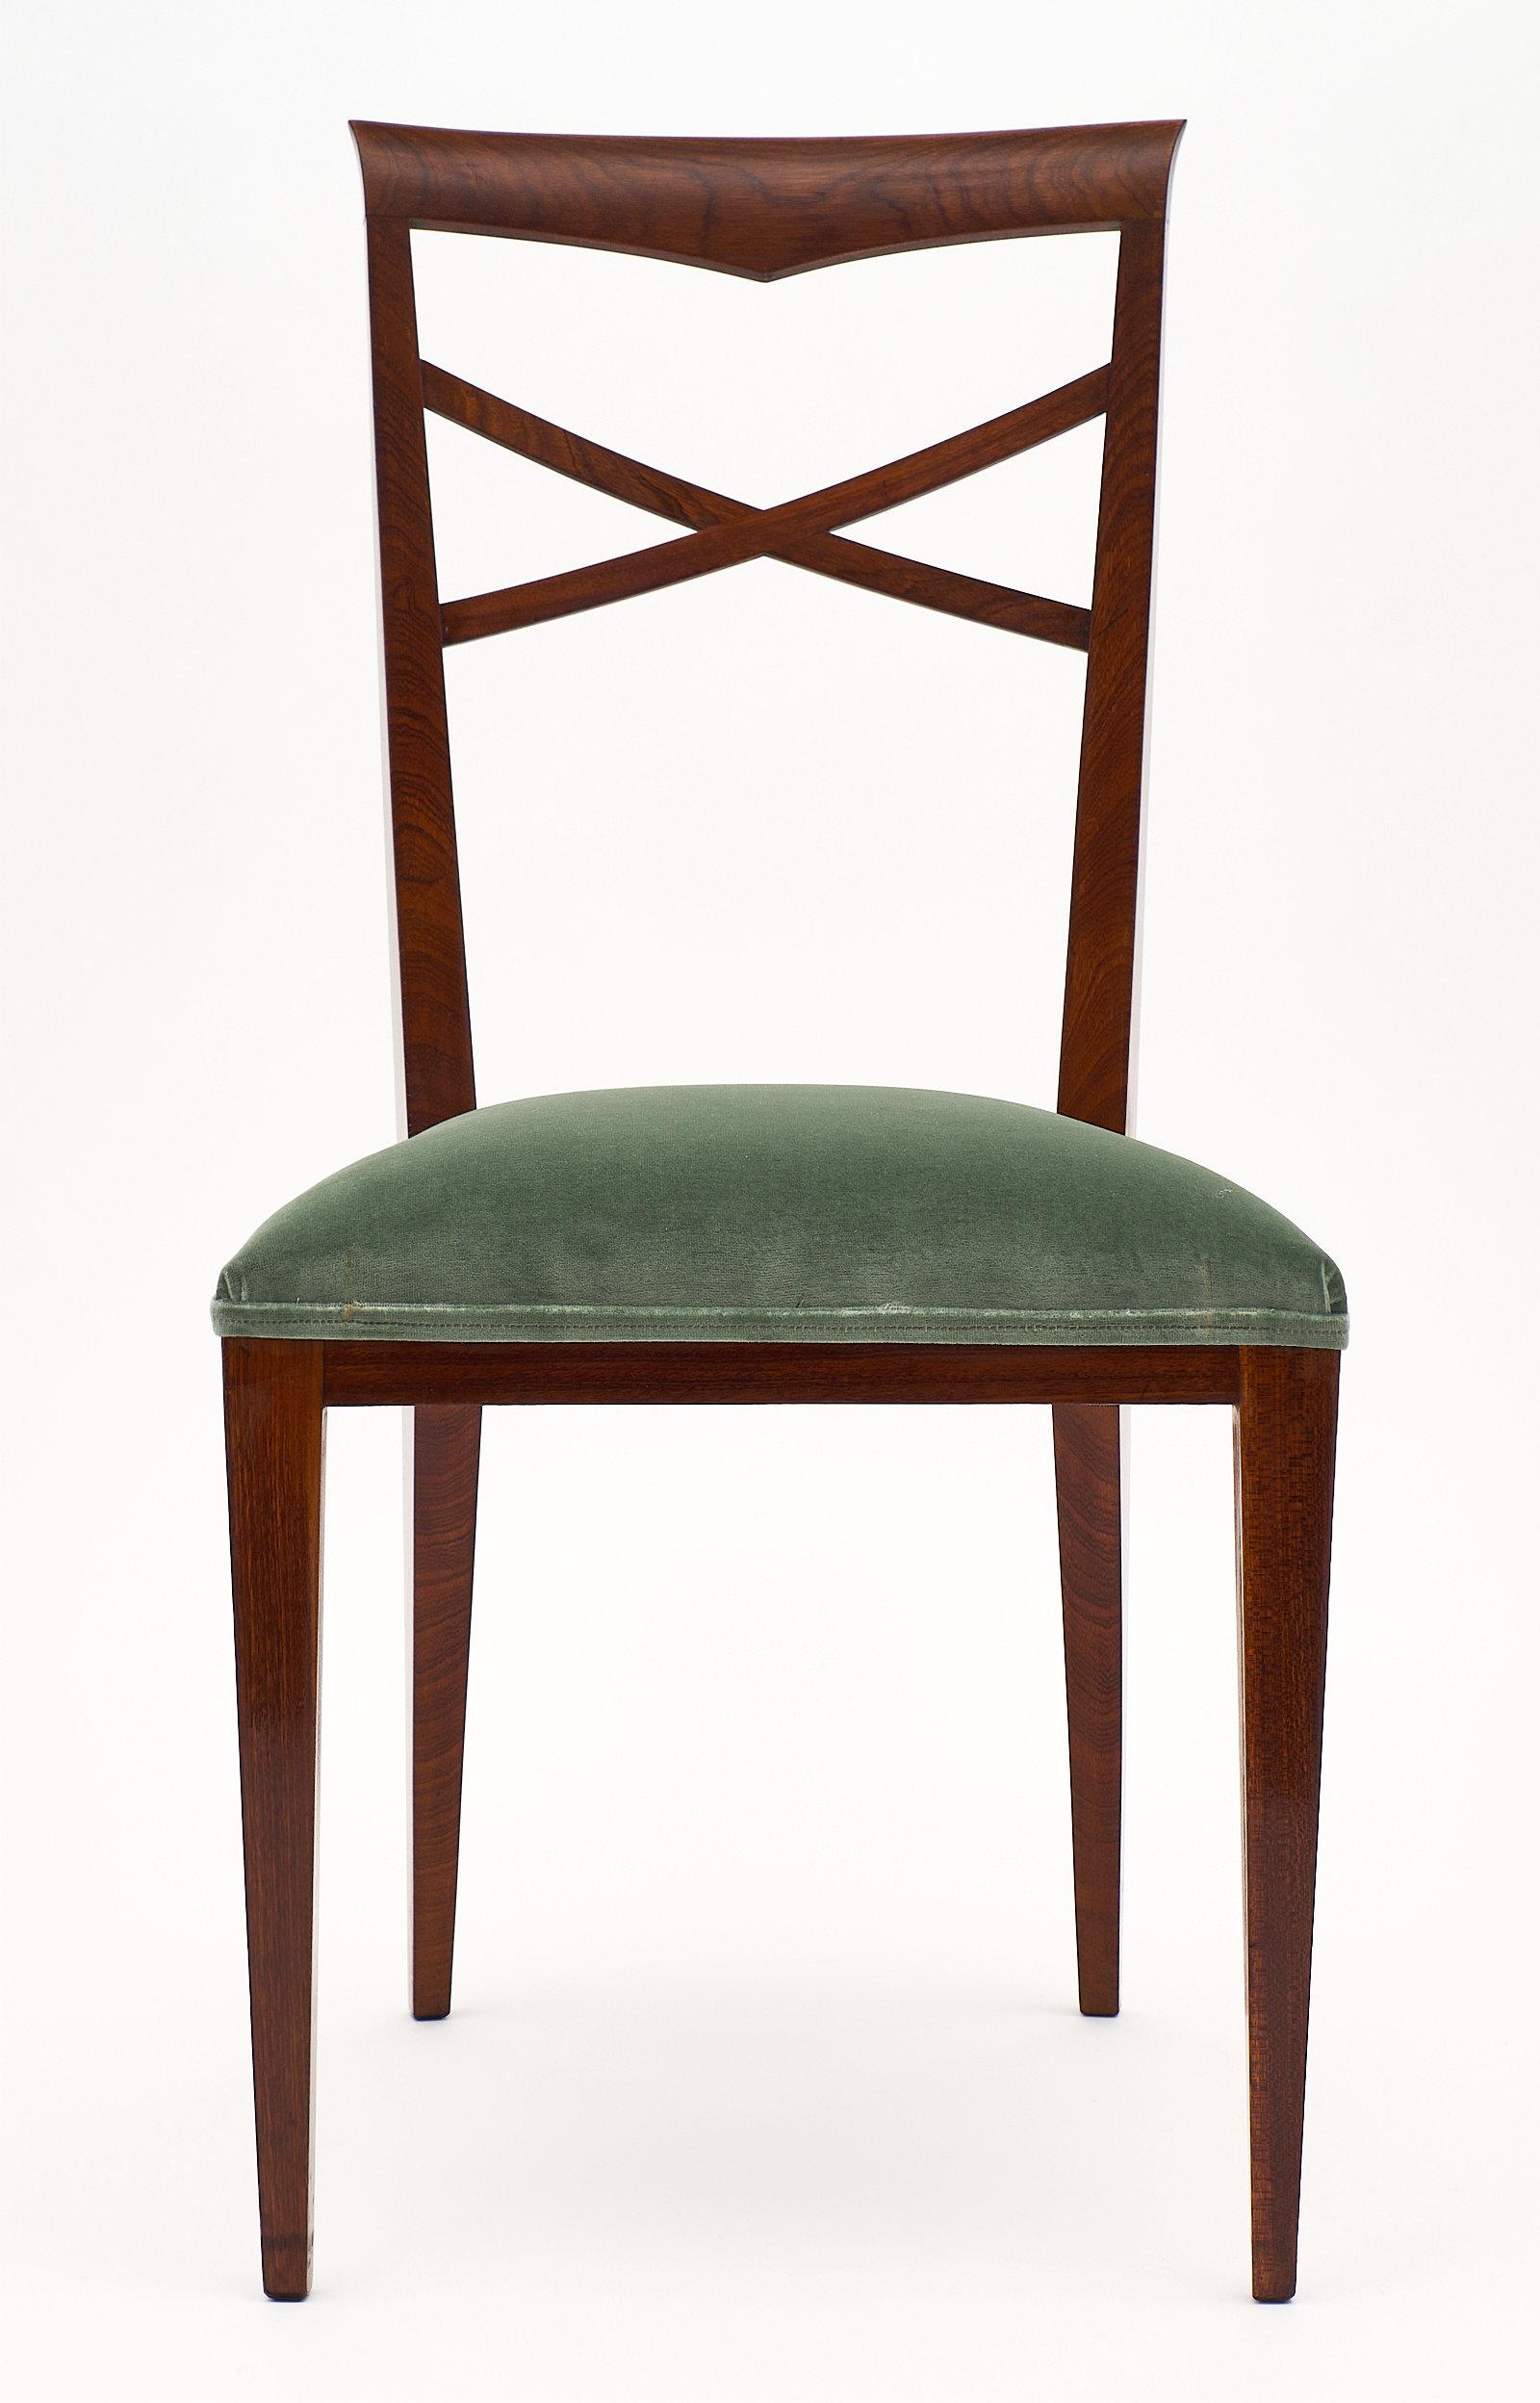 An elegant and refined set of Italian Paolo Buffa style dinning chairs mad of solid walnut finished with a French polish. We love the clean design reminiscent of Buffa, and the strength and comfort of the chairs. The design brings lightness to a